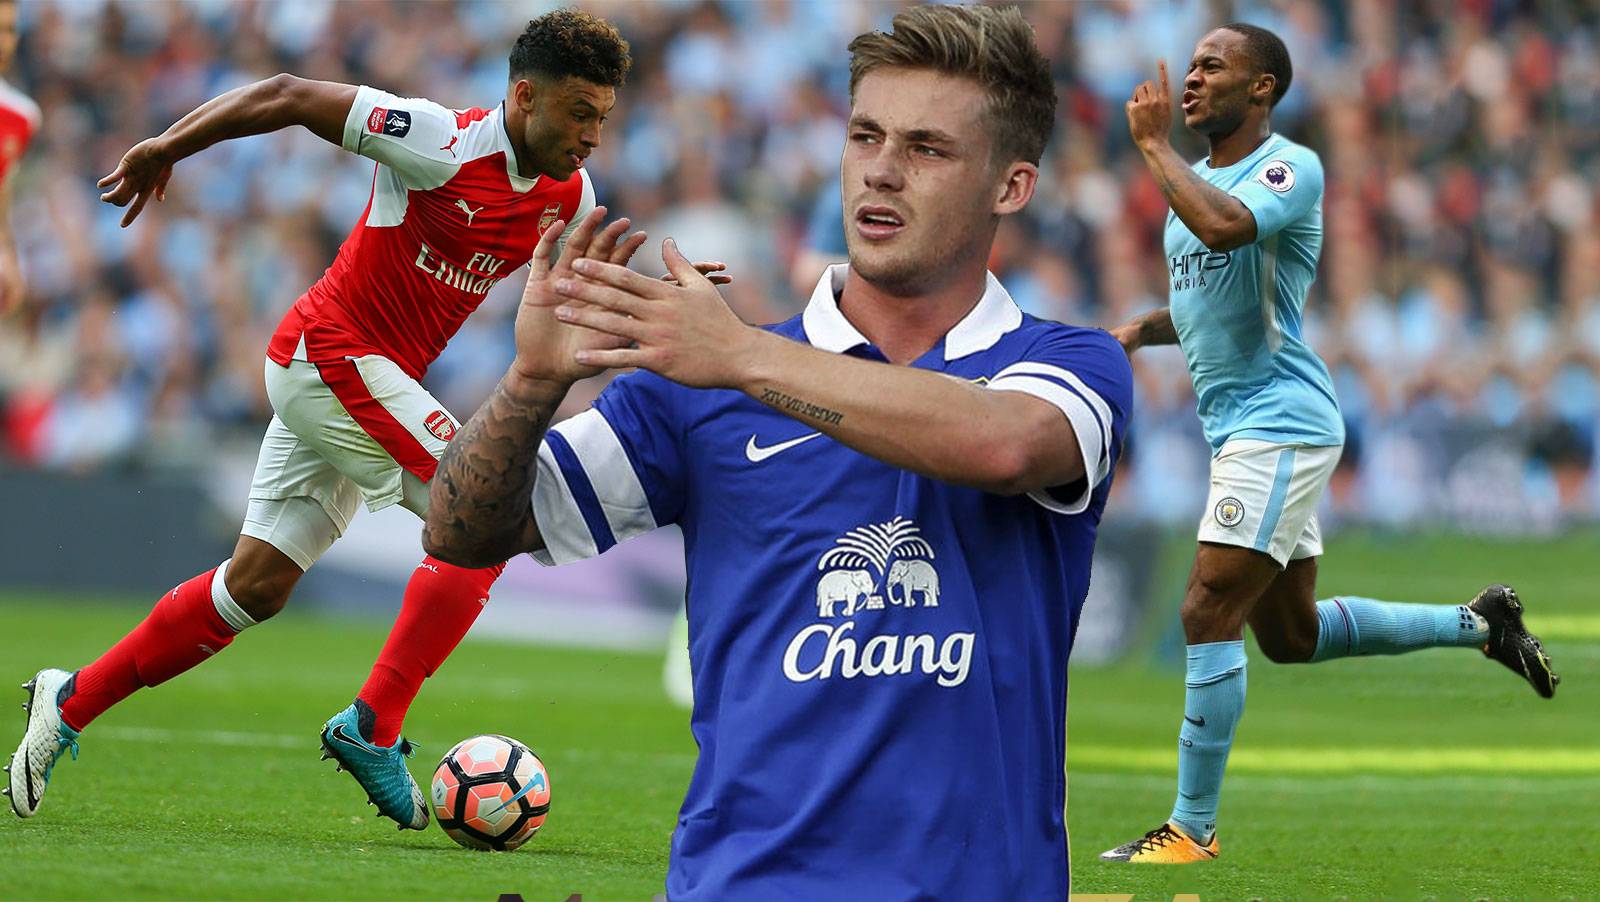 EPL Review Week 13: Arsenal leapfrog Spurs; Everton collapse; City striding